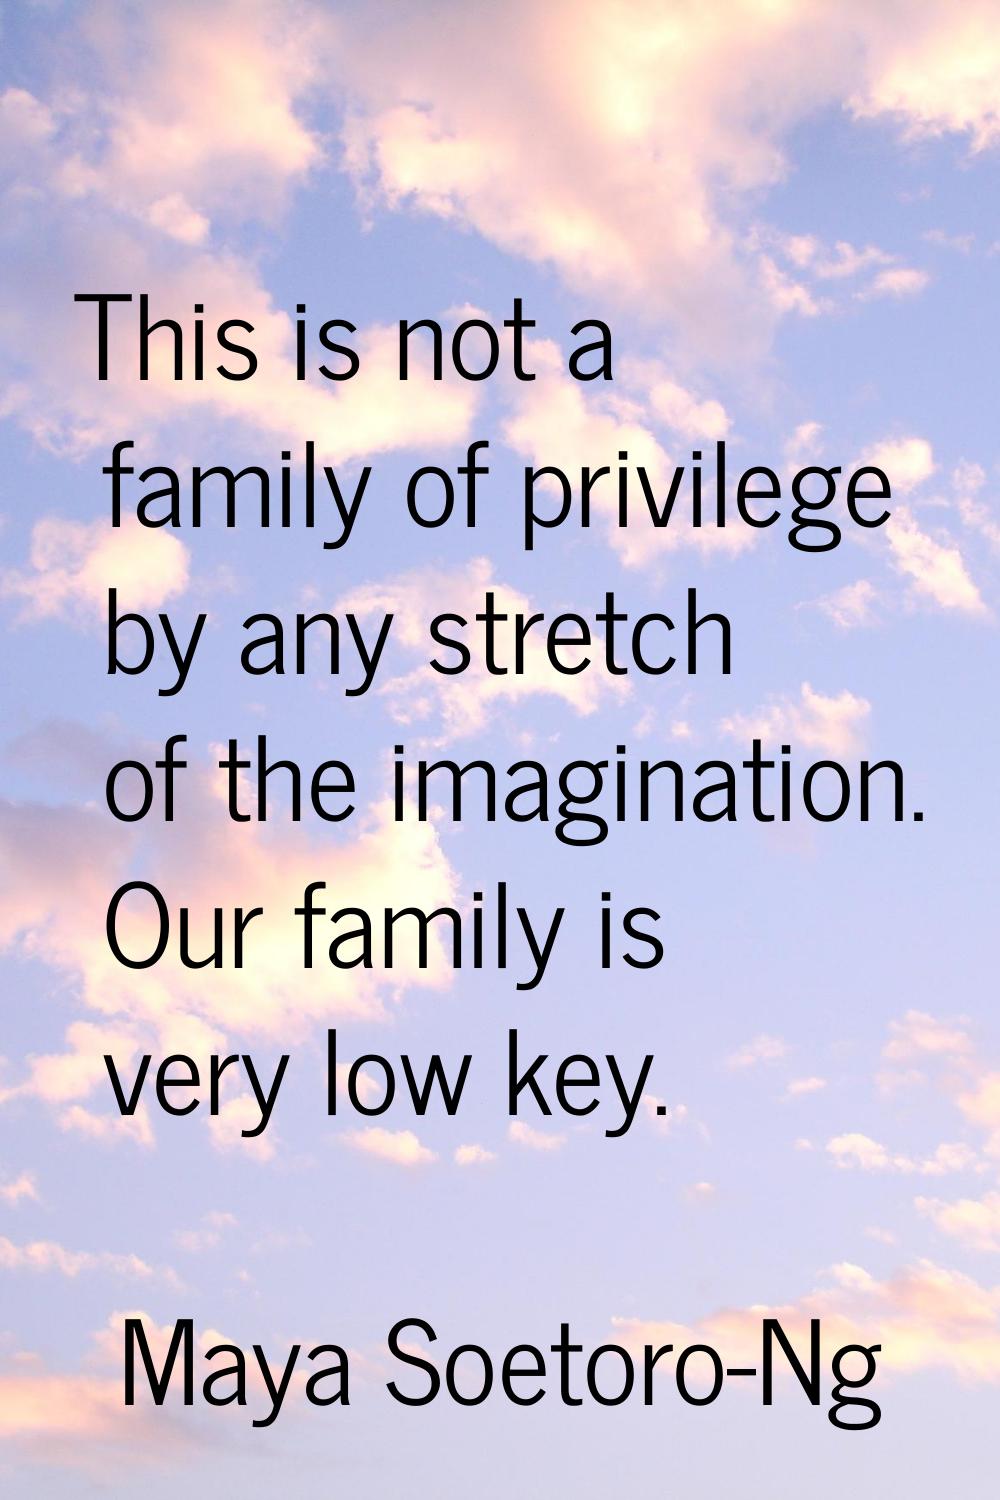 This is not a family of privilege by any stretch of the imagination. Our family is very low key.